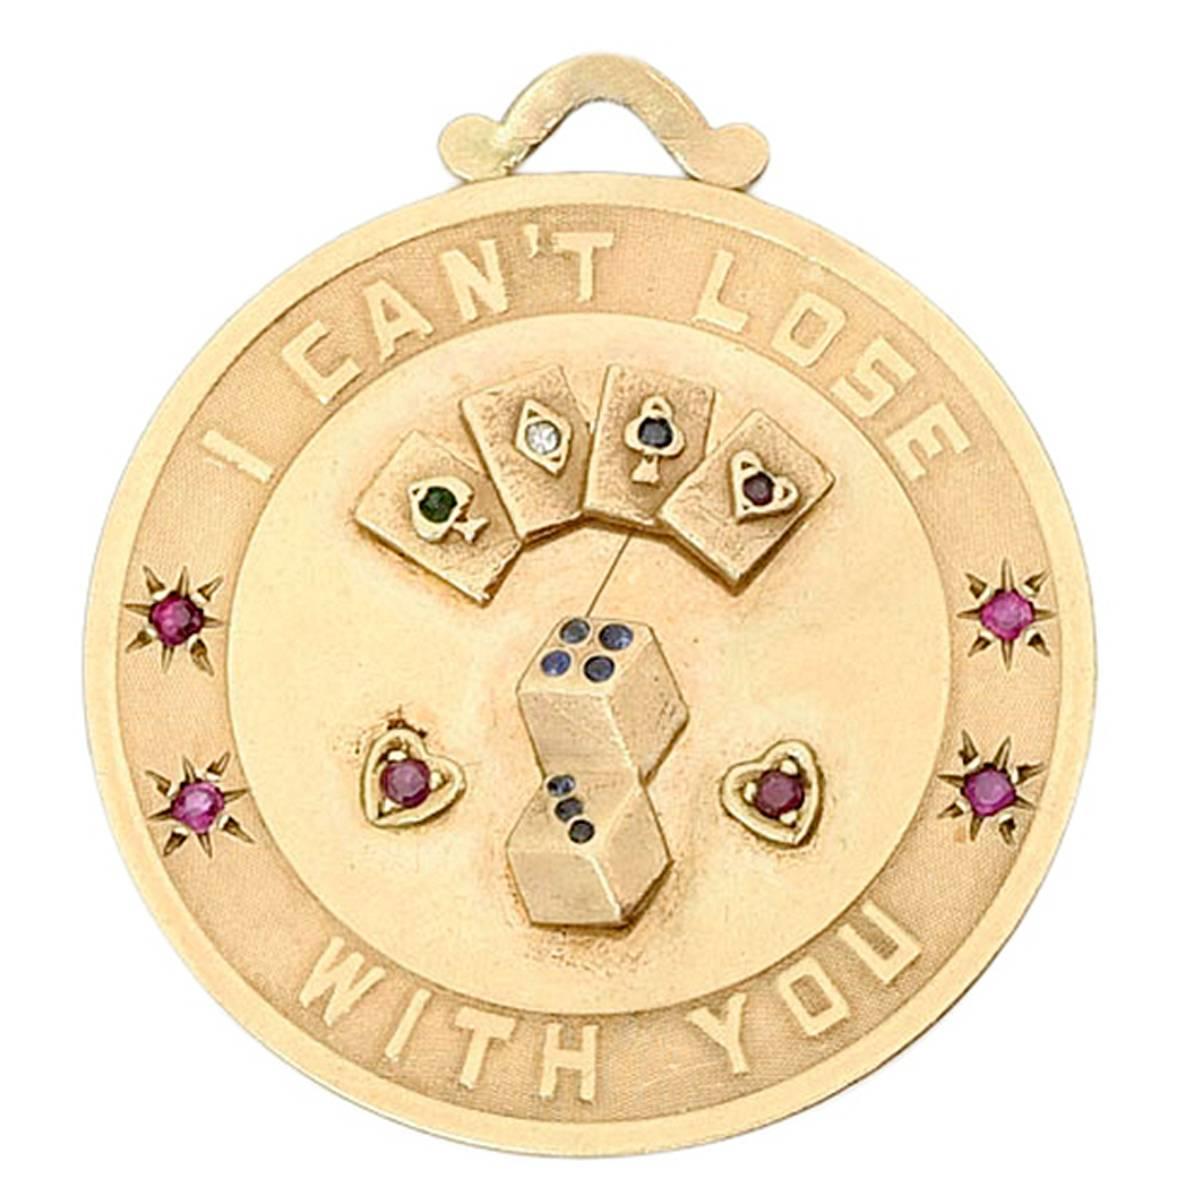 "I CAN'T LOSE WITH YOU" Gold Disc Charm